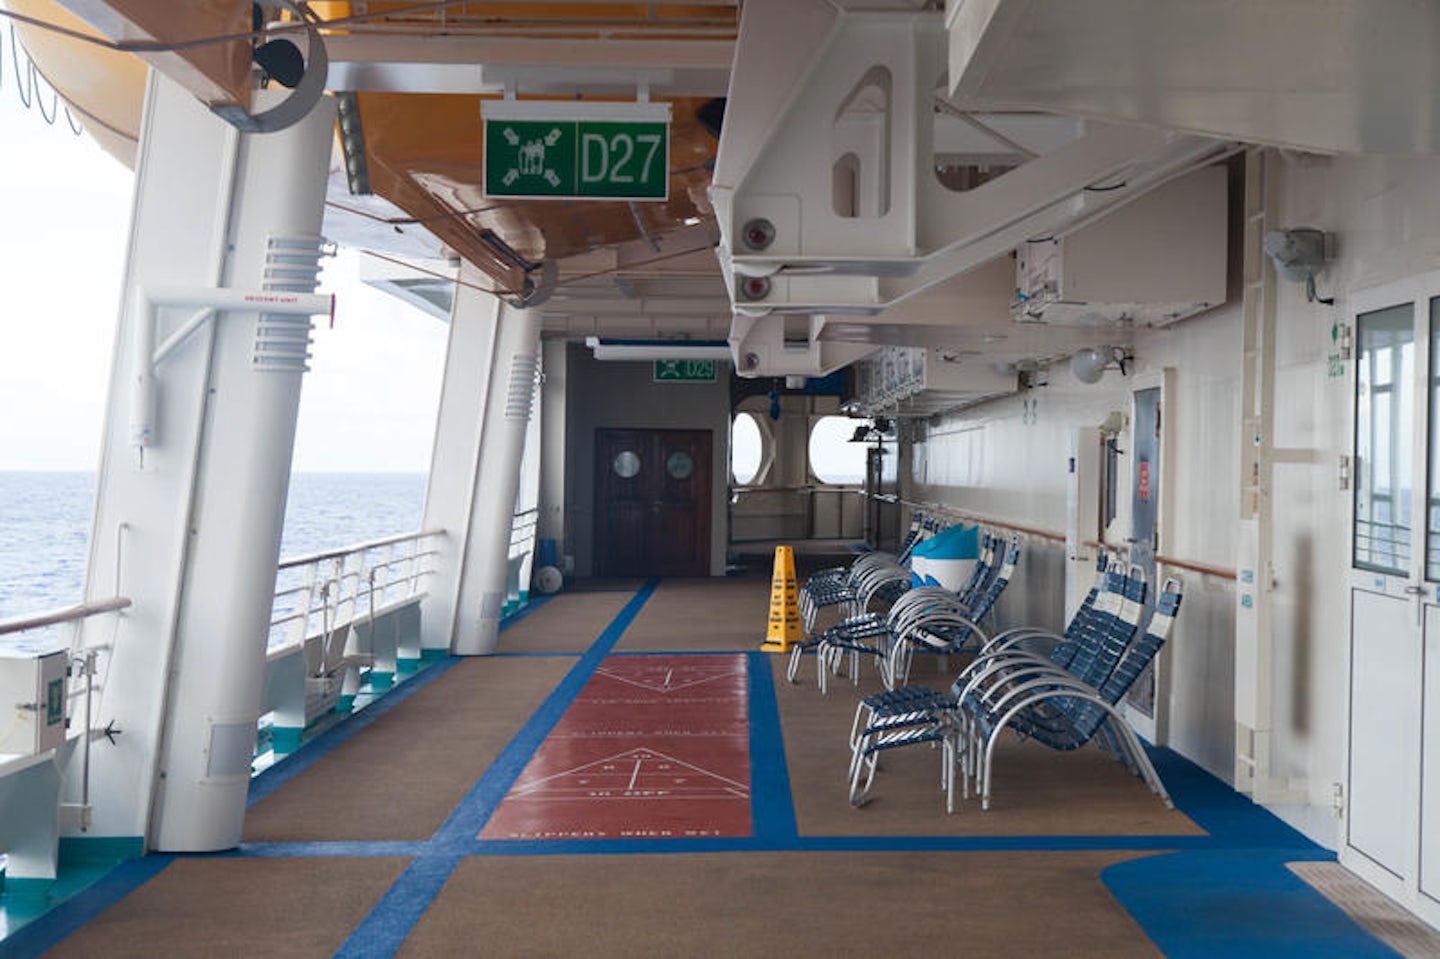 Main Deck (Level 4) on Independence of the Seas